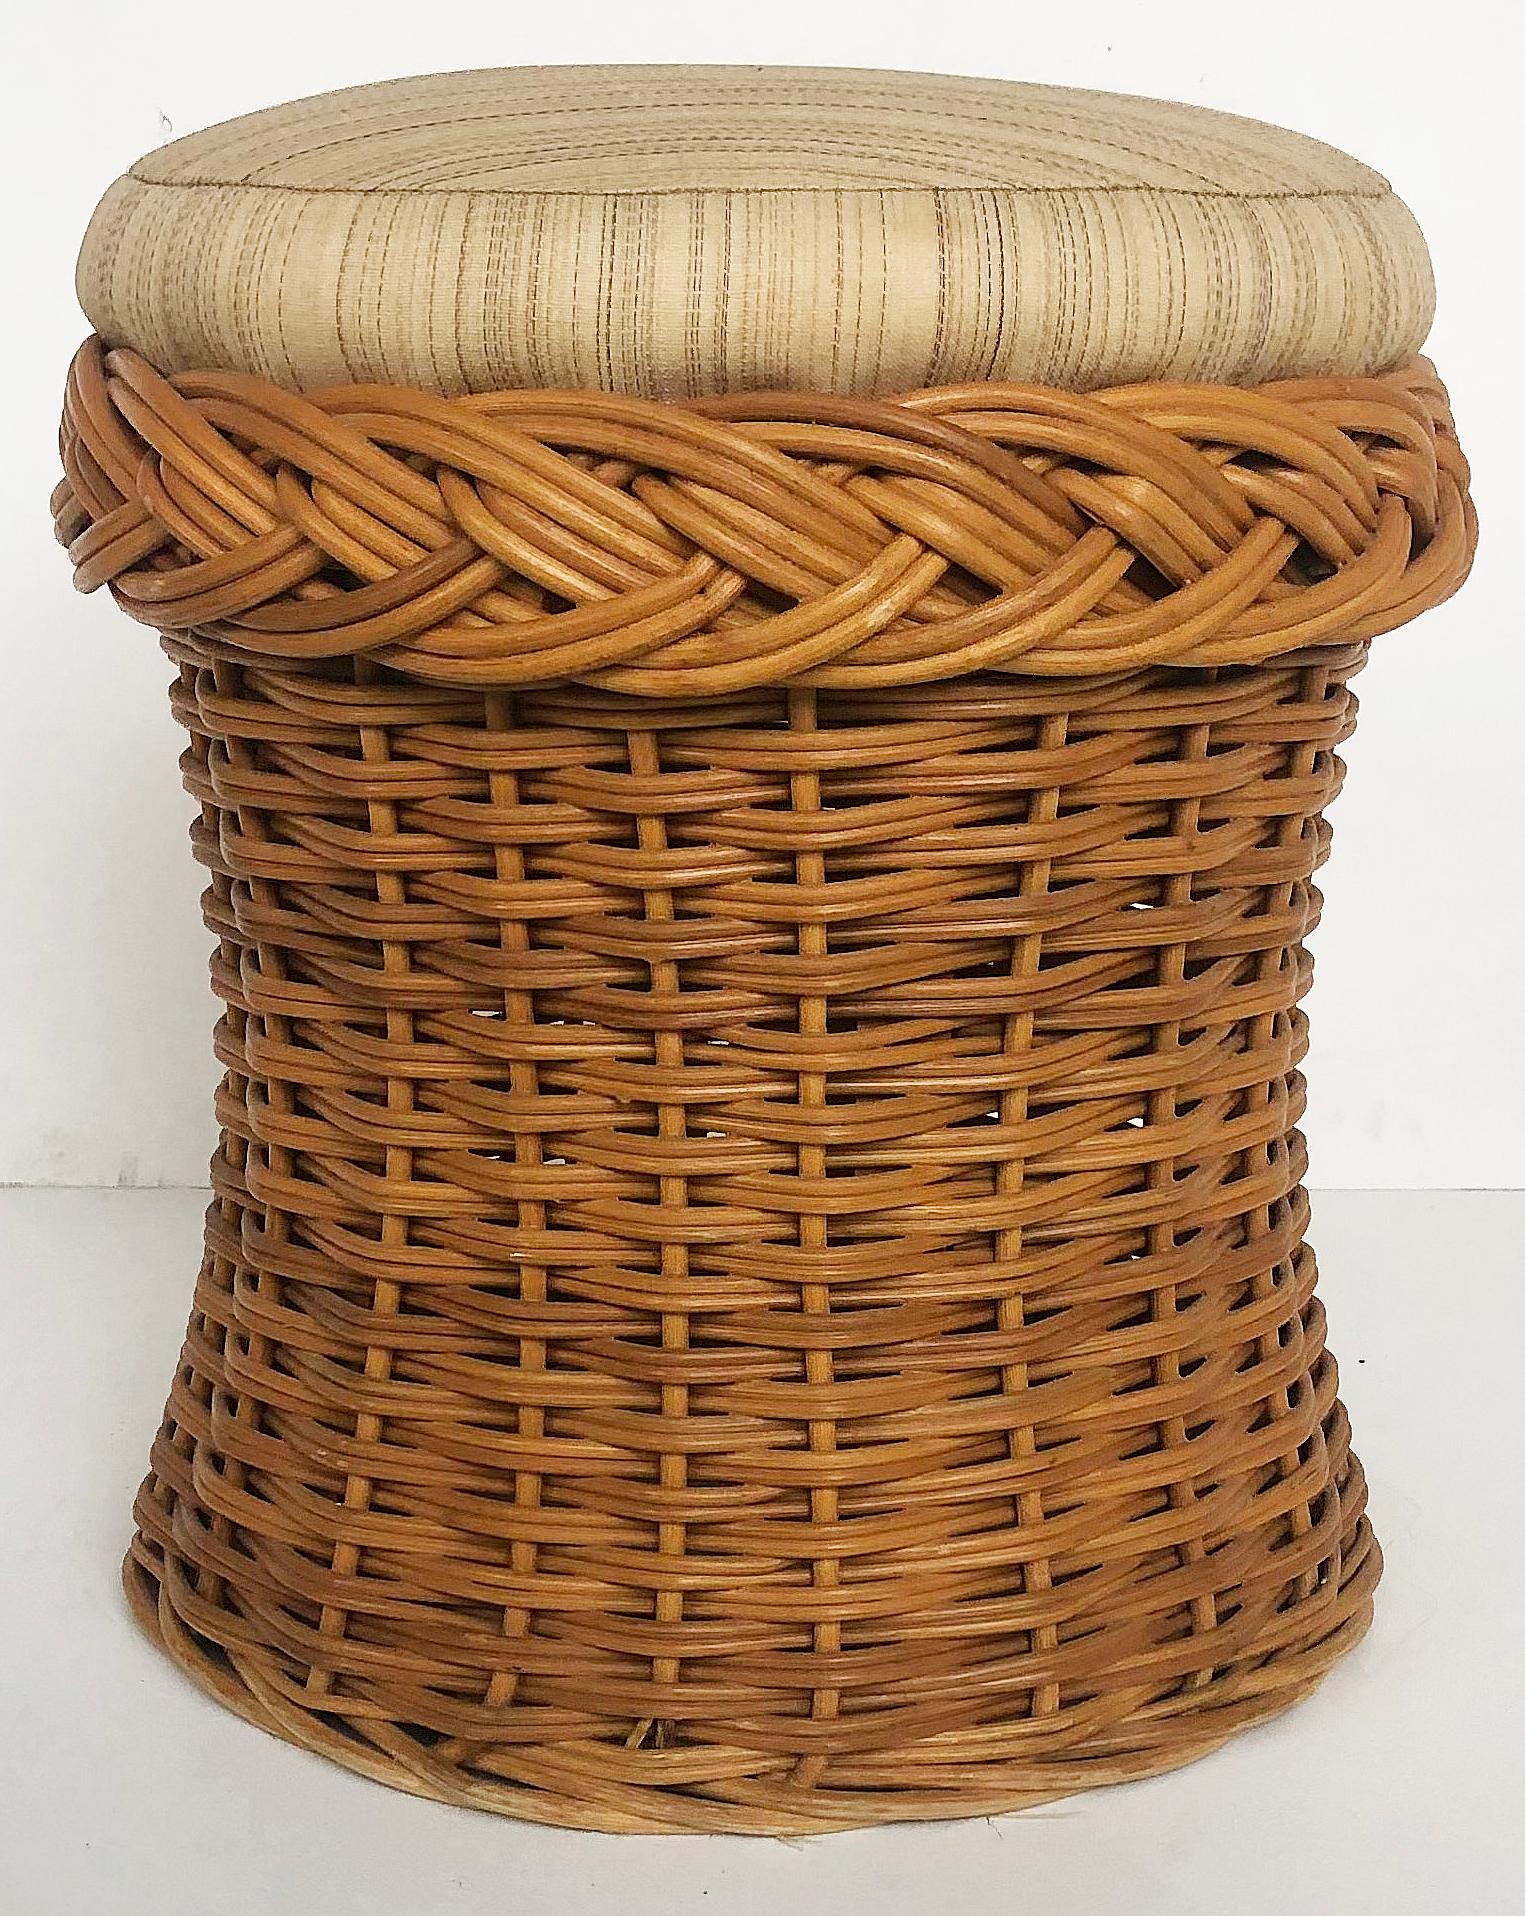 Wicker works rattan stool with upholstered seat cushion

Offered for sale is vintage wicker still that has the Wicker Works signature braided trim edge at the top. The stool has a round substantial upholstered seat cushion. The stool can be used